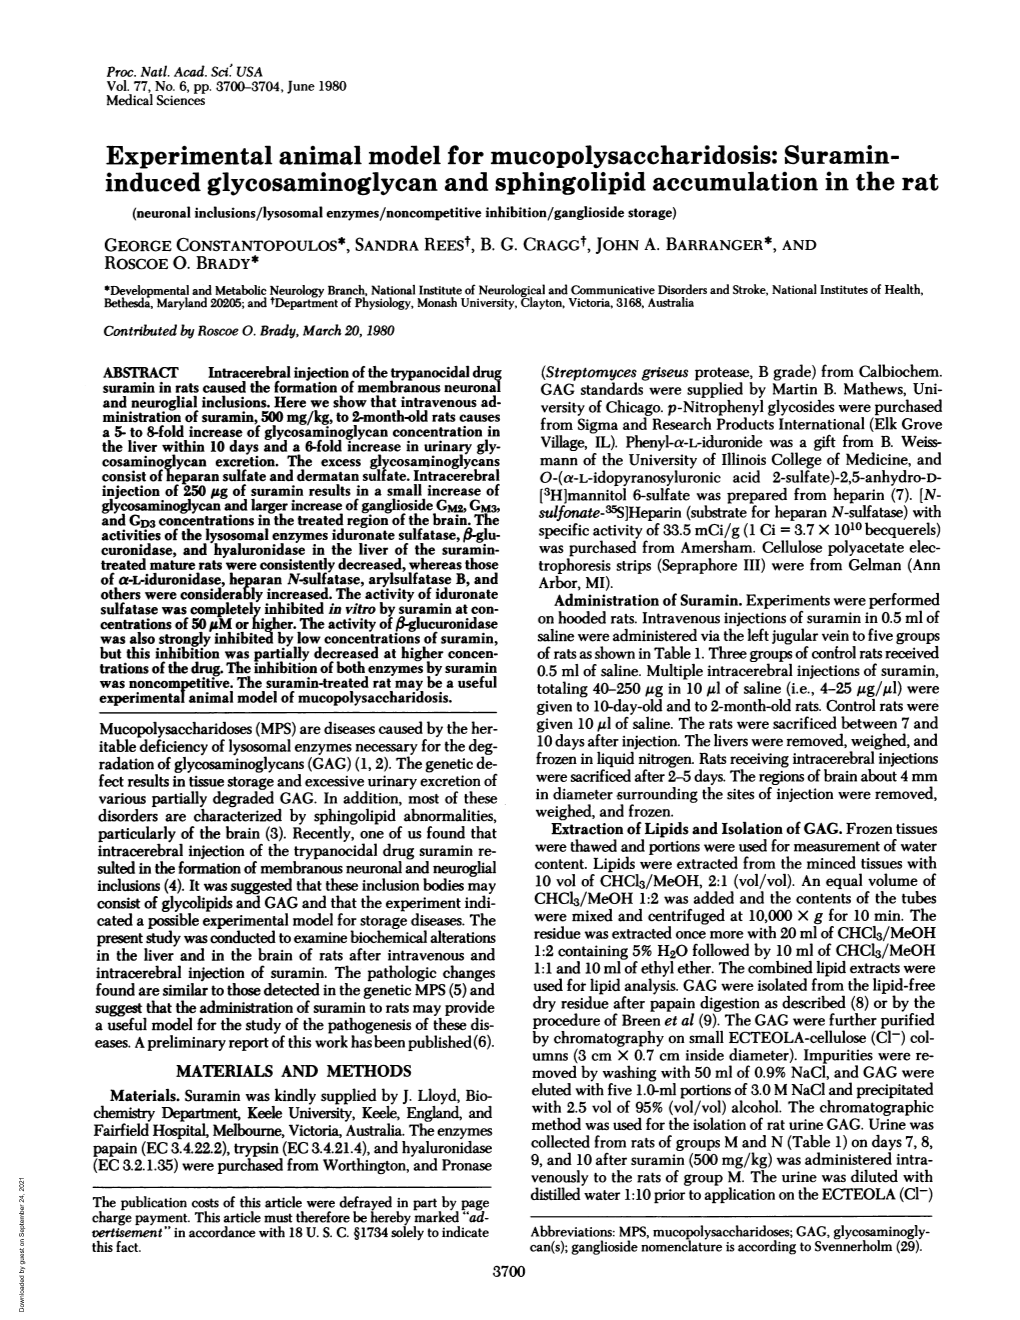 Induced Glycosaminoglycan and Sphingolipid Accumulation